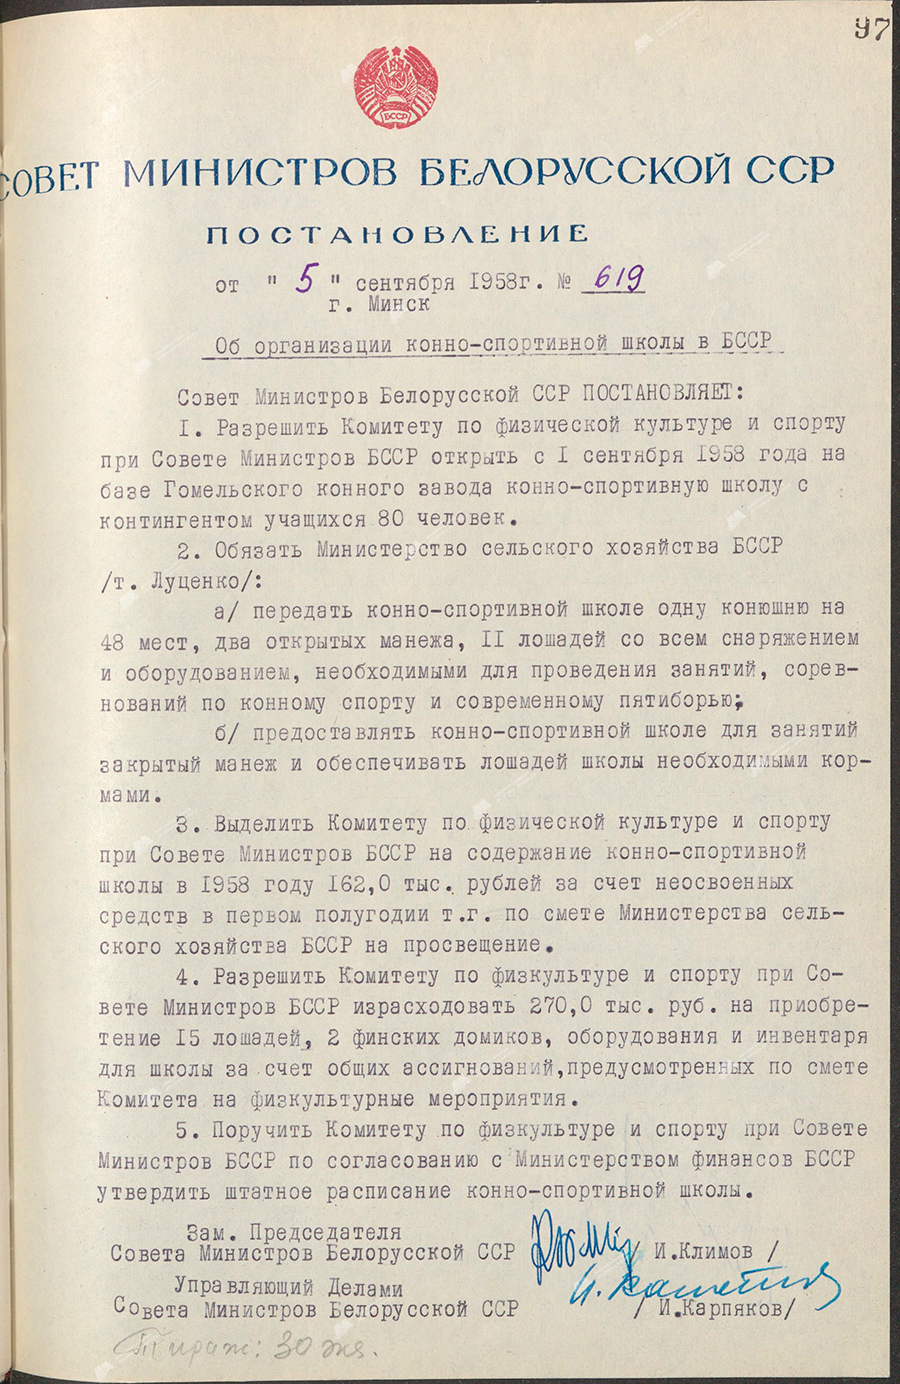 Resolution No. 619 of the Council of Ministers of the BSSR «On the organization of an equestrian school in the BSSR»-с. 0